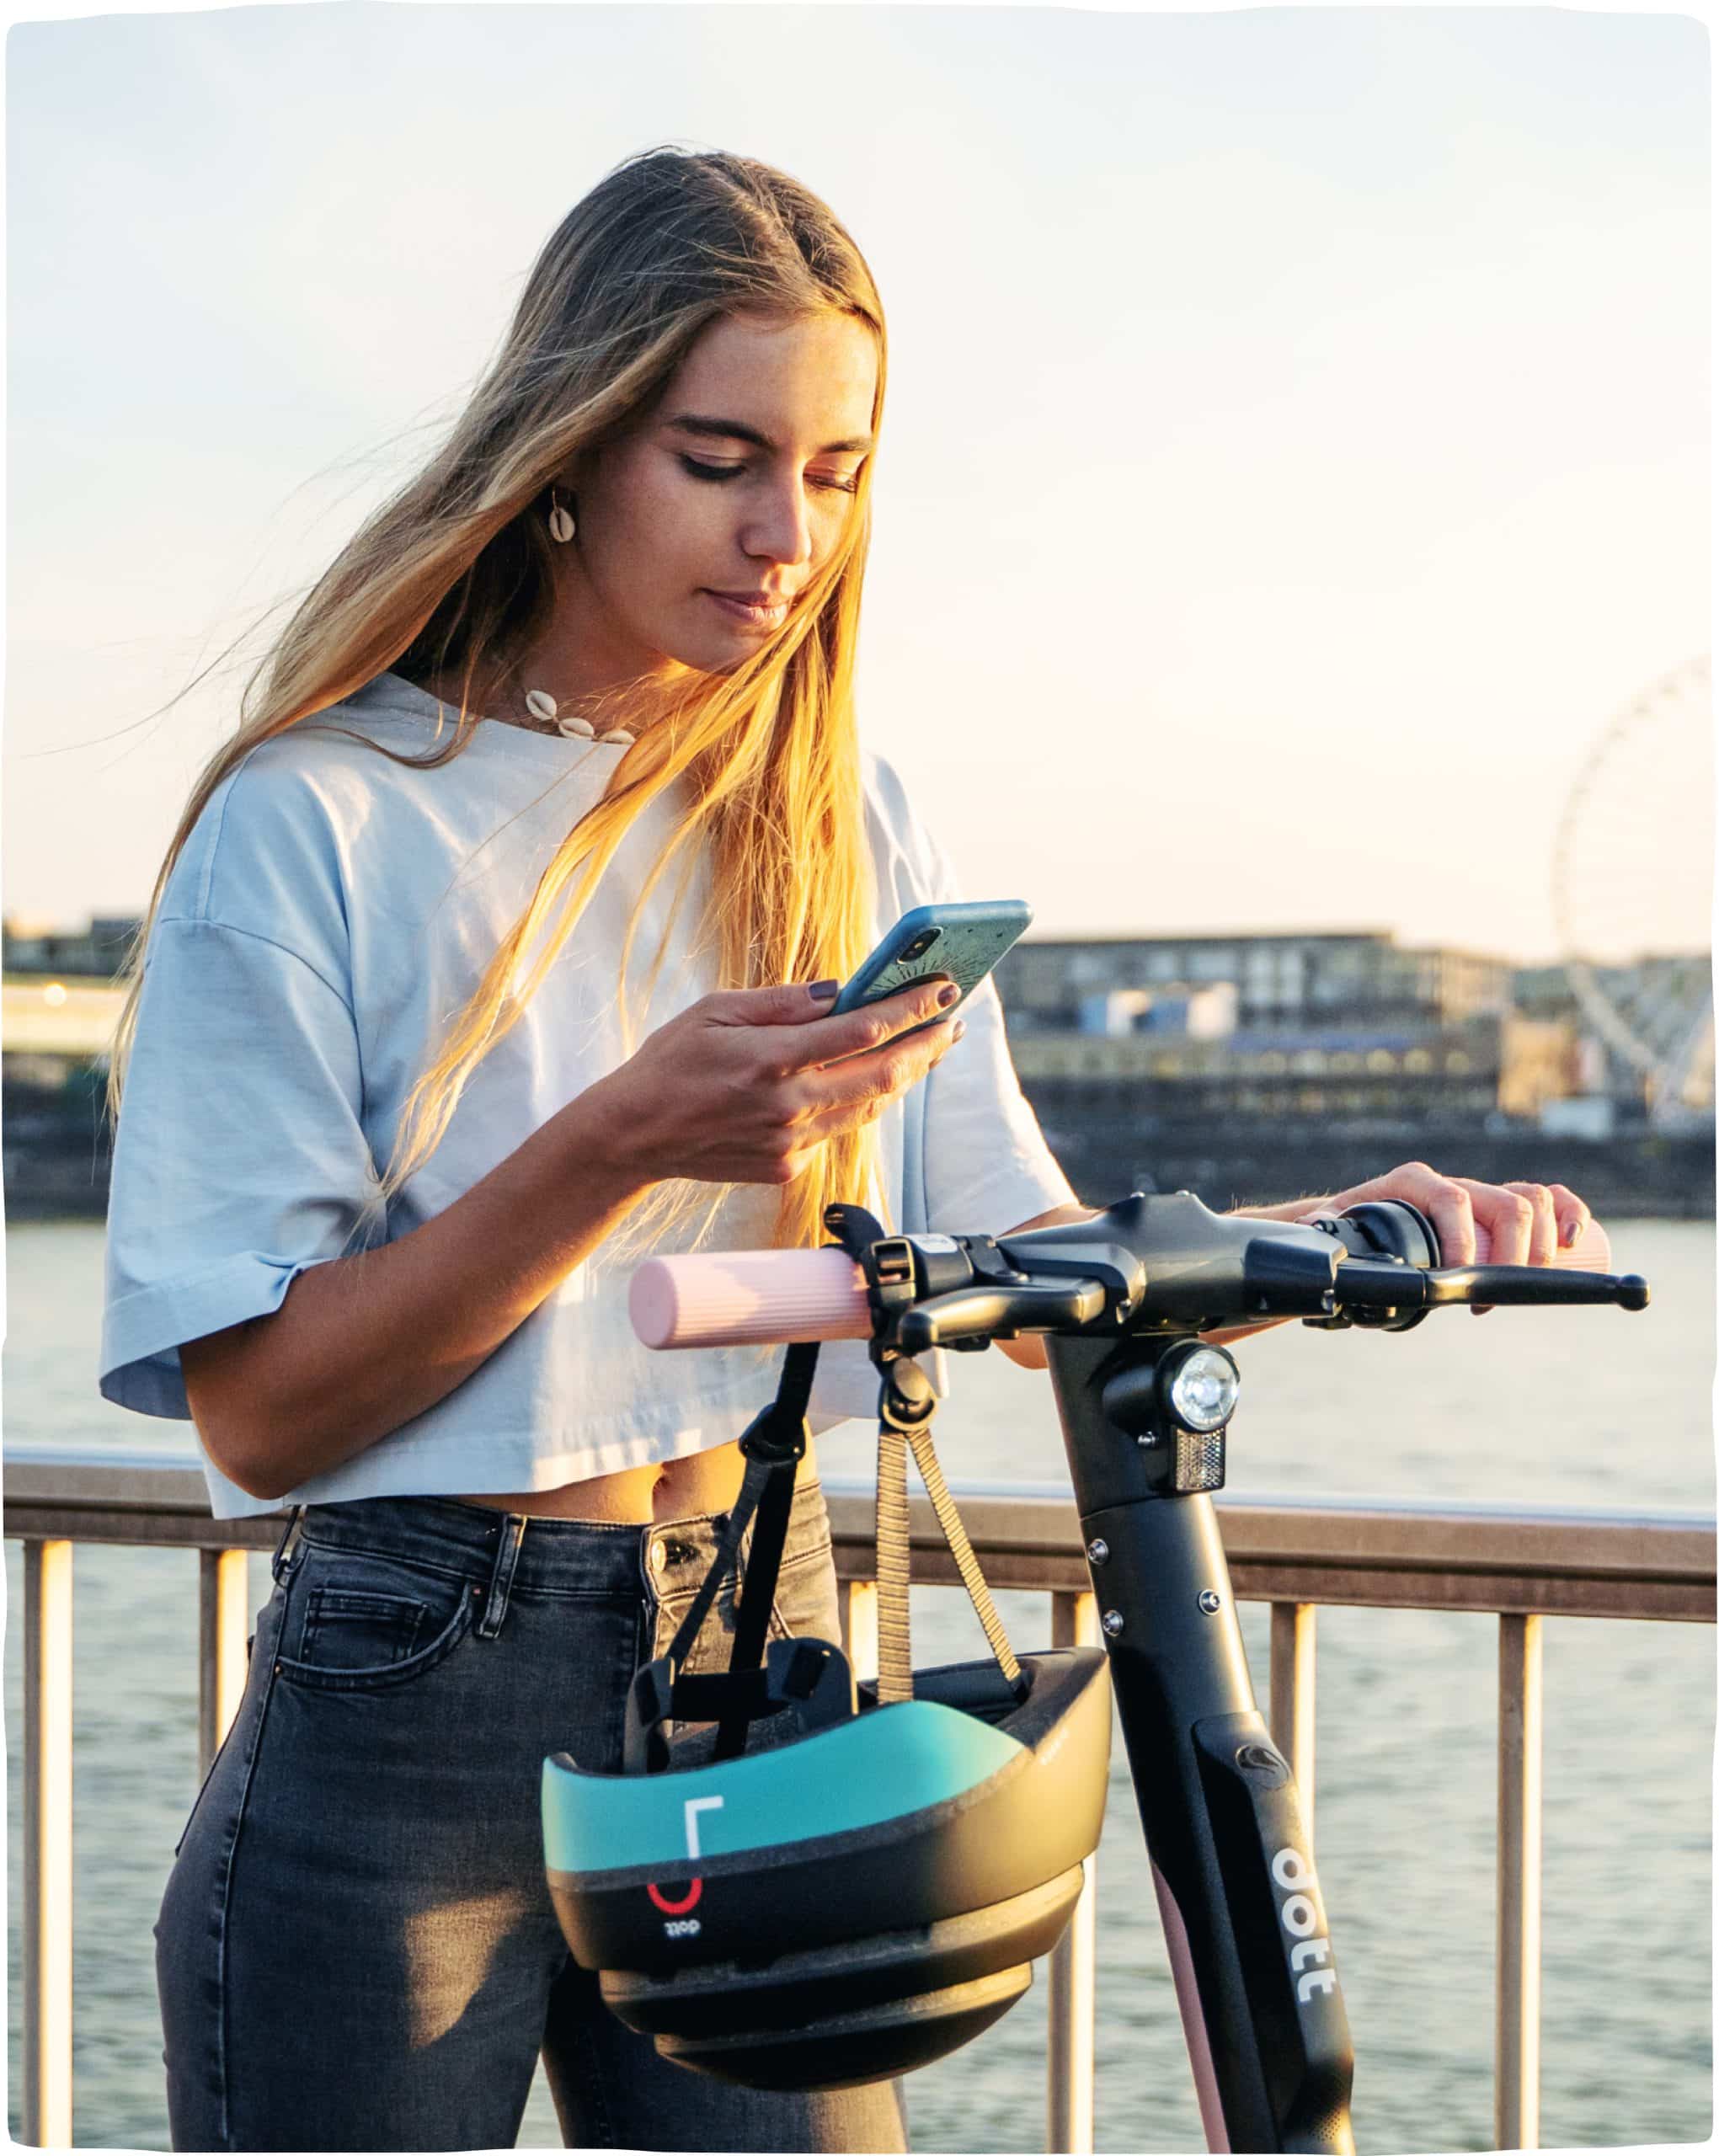 A young woman stands on a Dott and checks her phone in her right hand while she holds the scooter steady with her left hand. The evening sunlight reflects golden on her blonde hair.